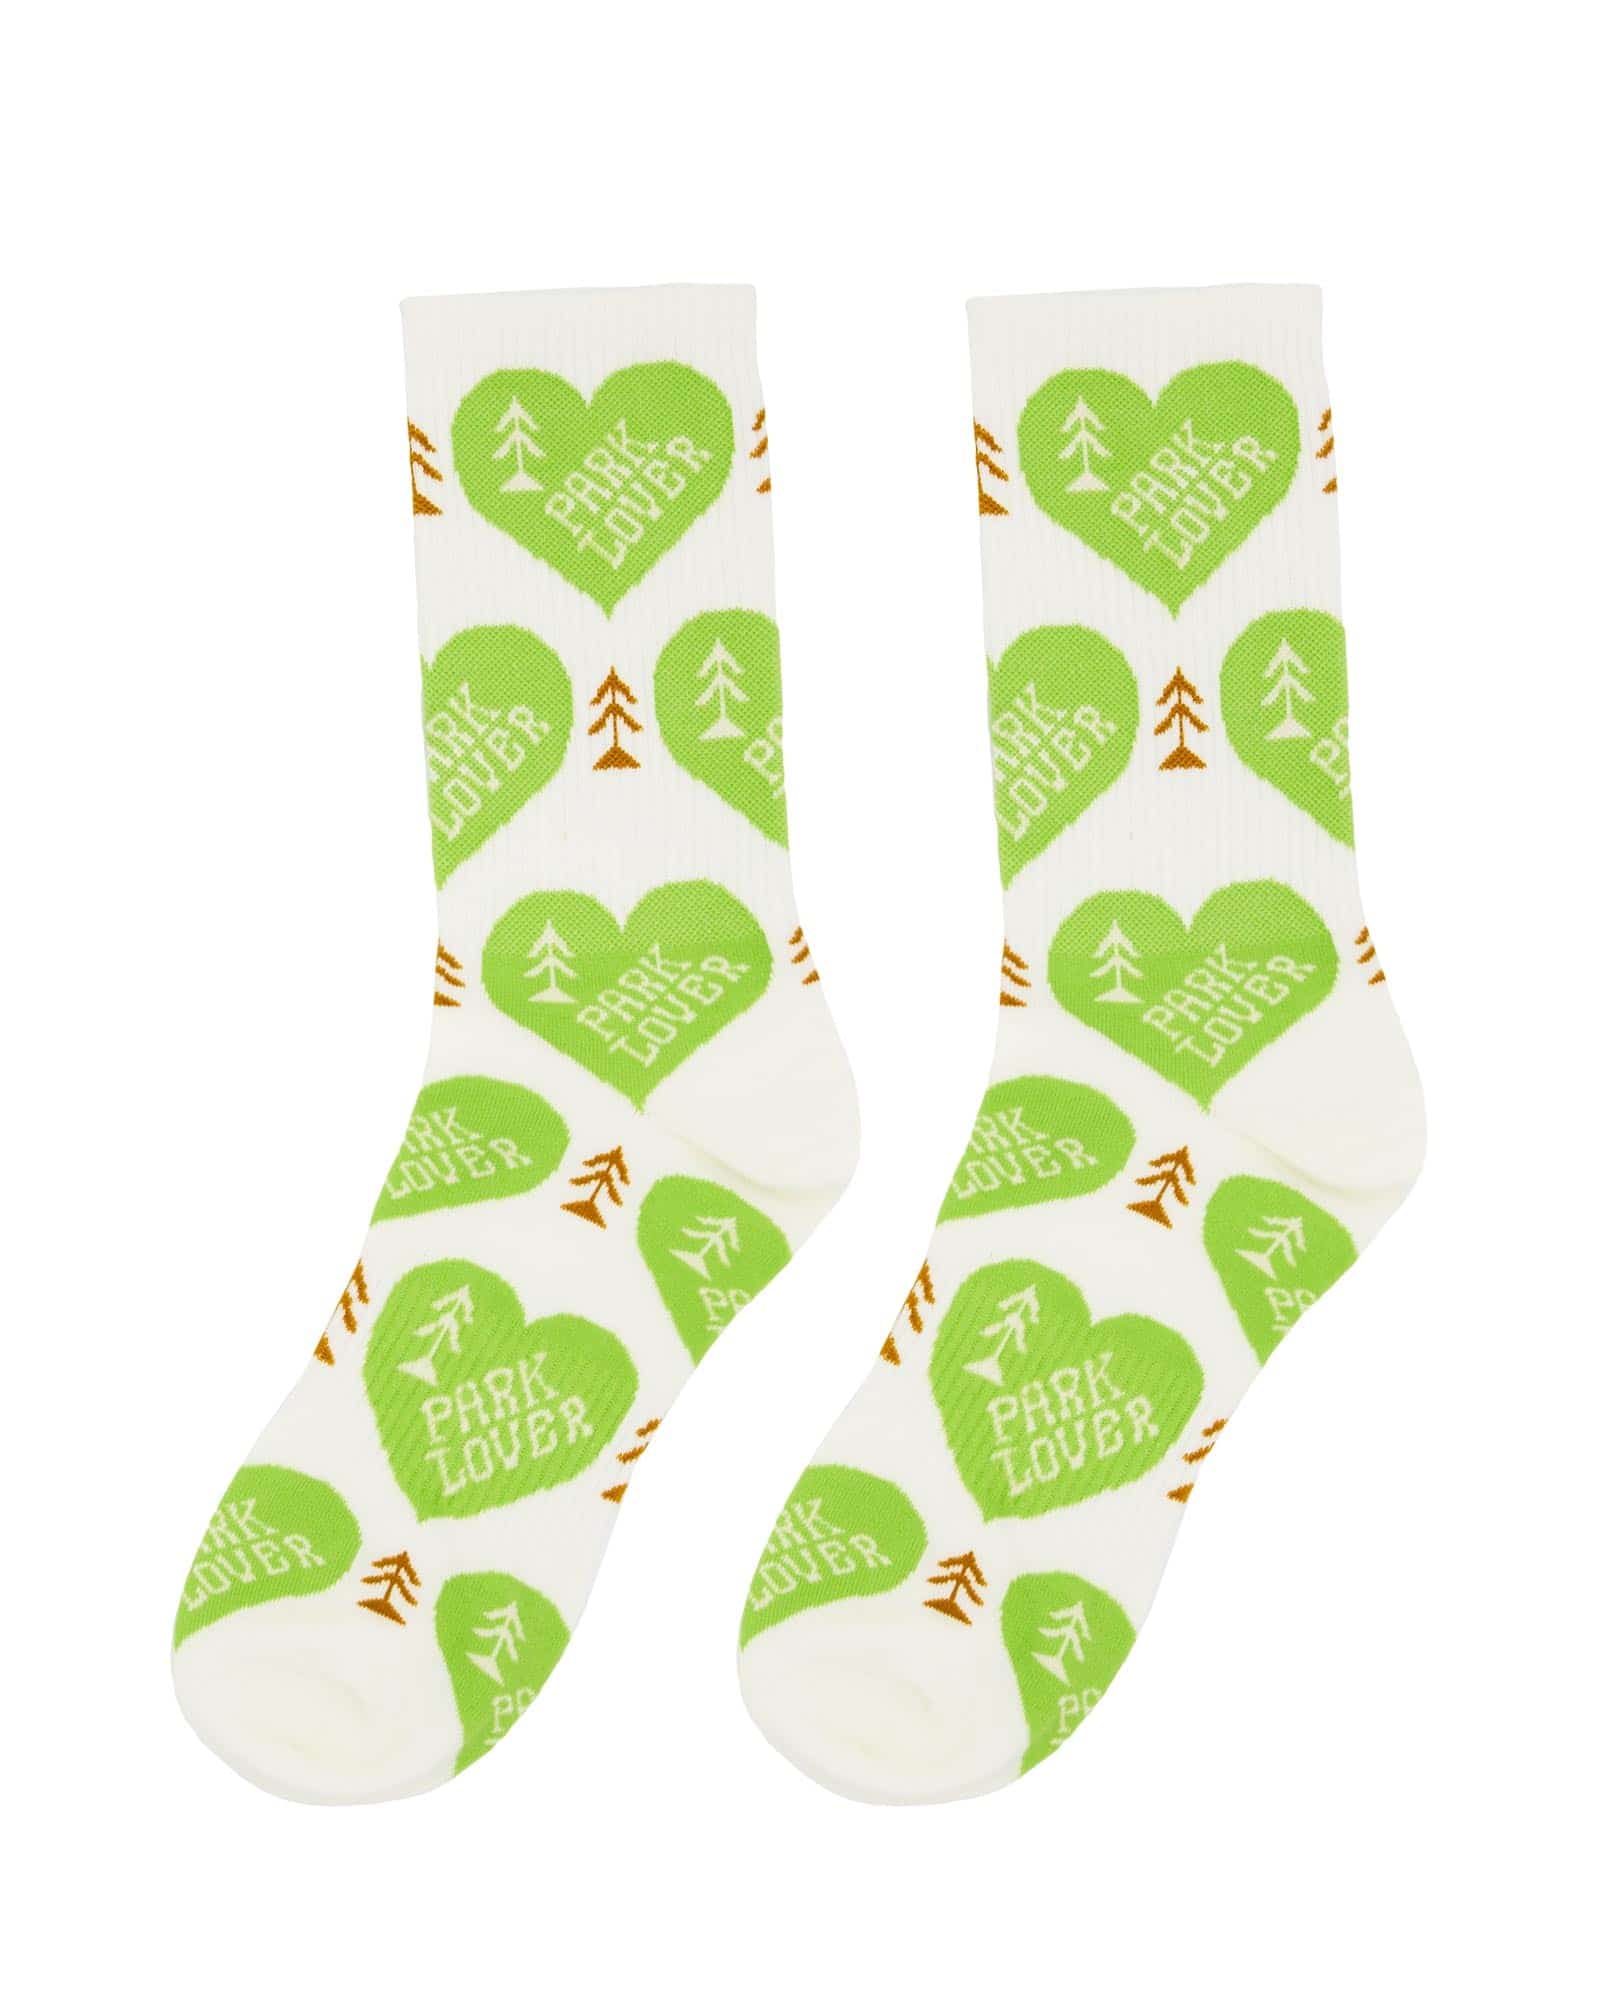 White socks with green hearts that say "park lover" and trees